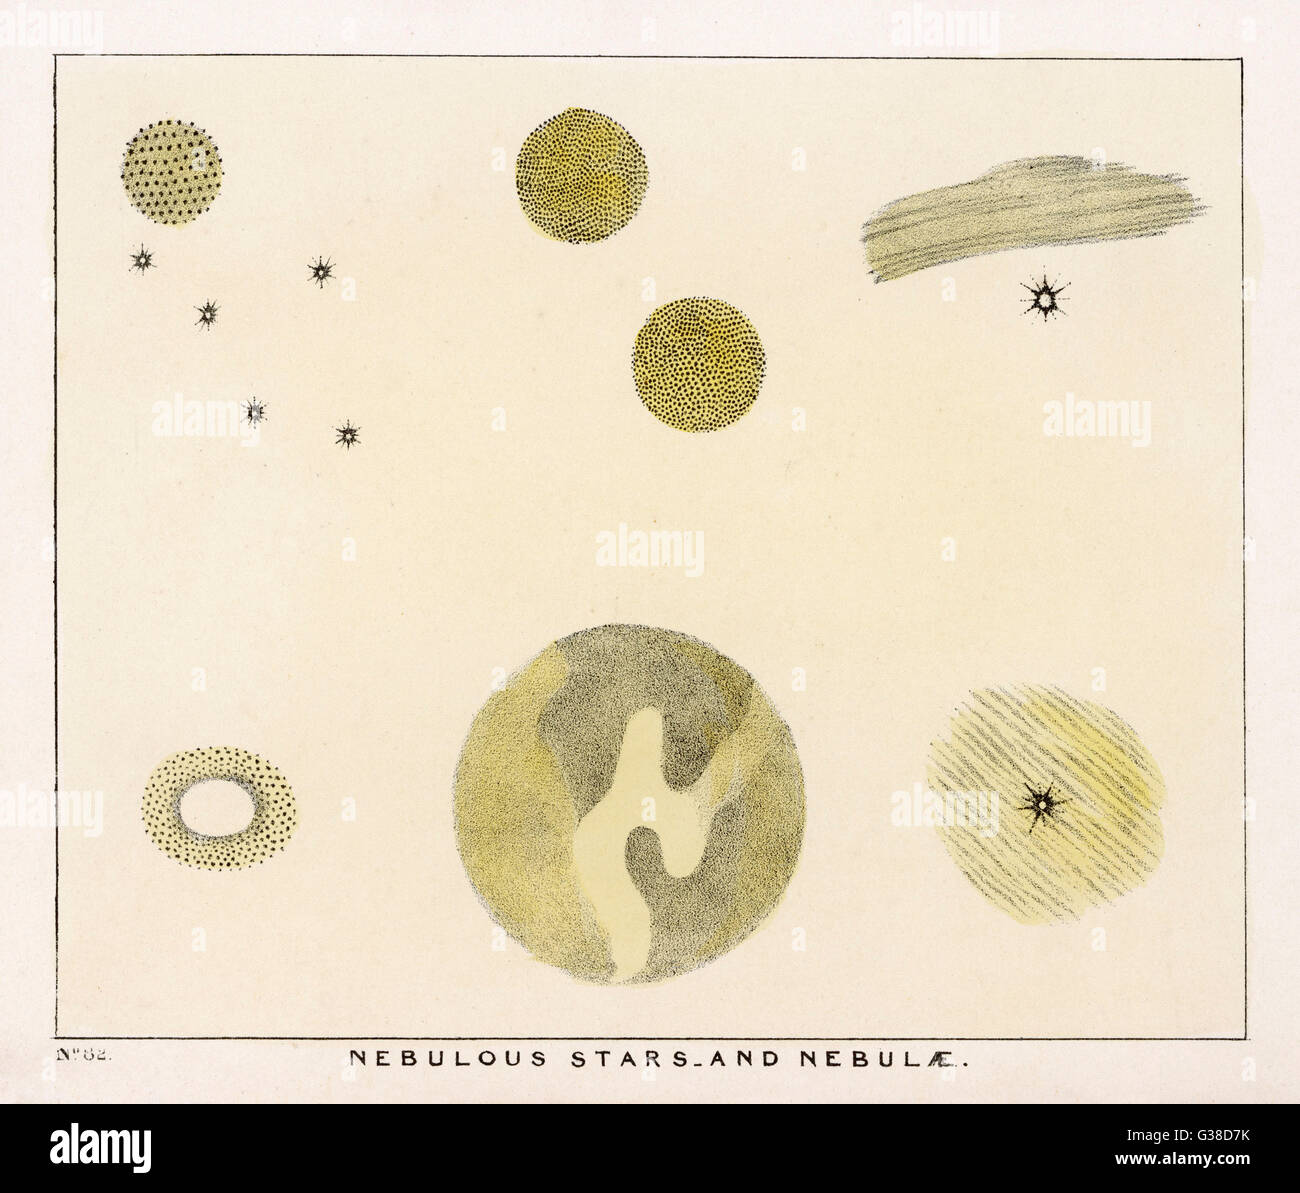 A diagram showing various  nebulous stars and nebulae        Date: 1849 Stock Photo